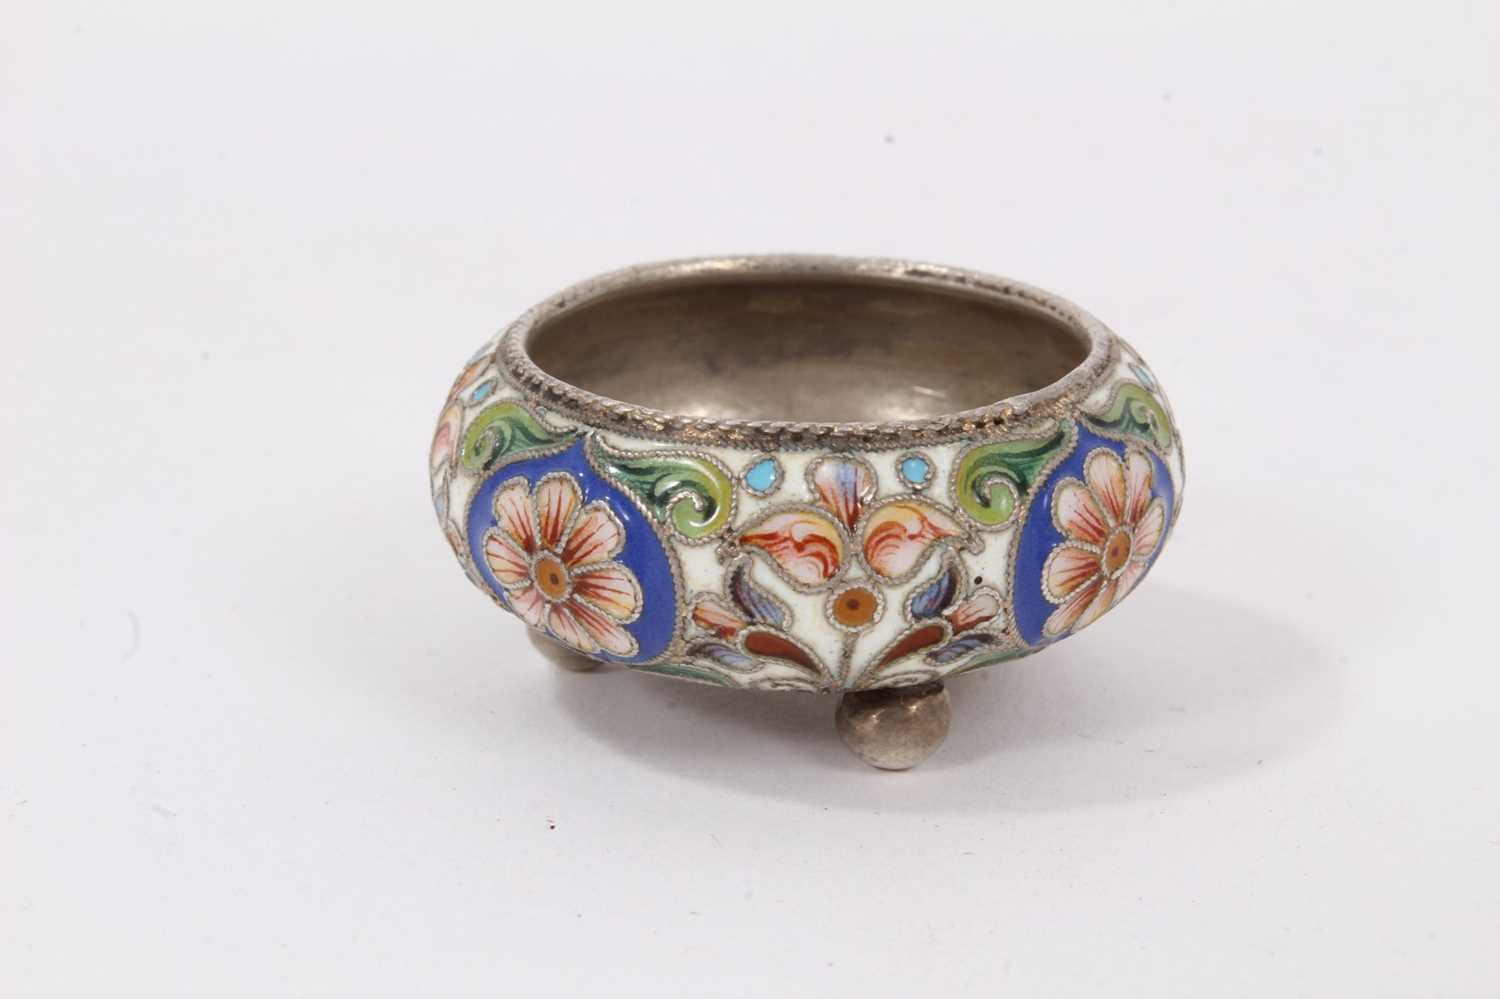 Late 19th/early 20th century Russian cloisonné salt - Image 3 of 6